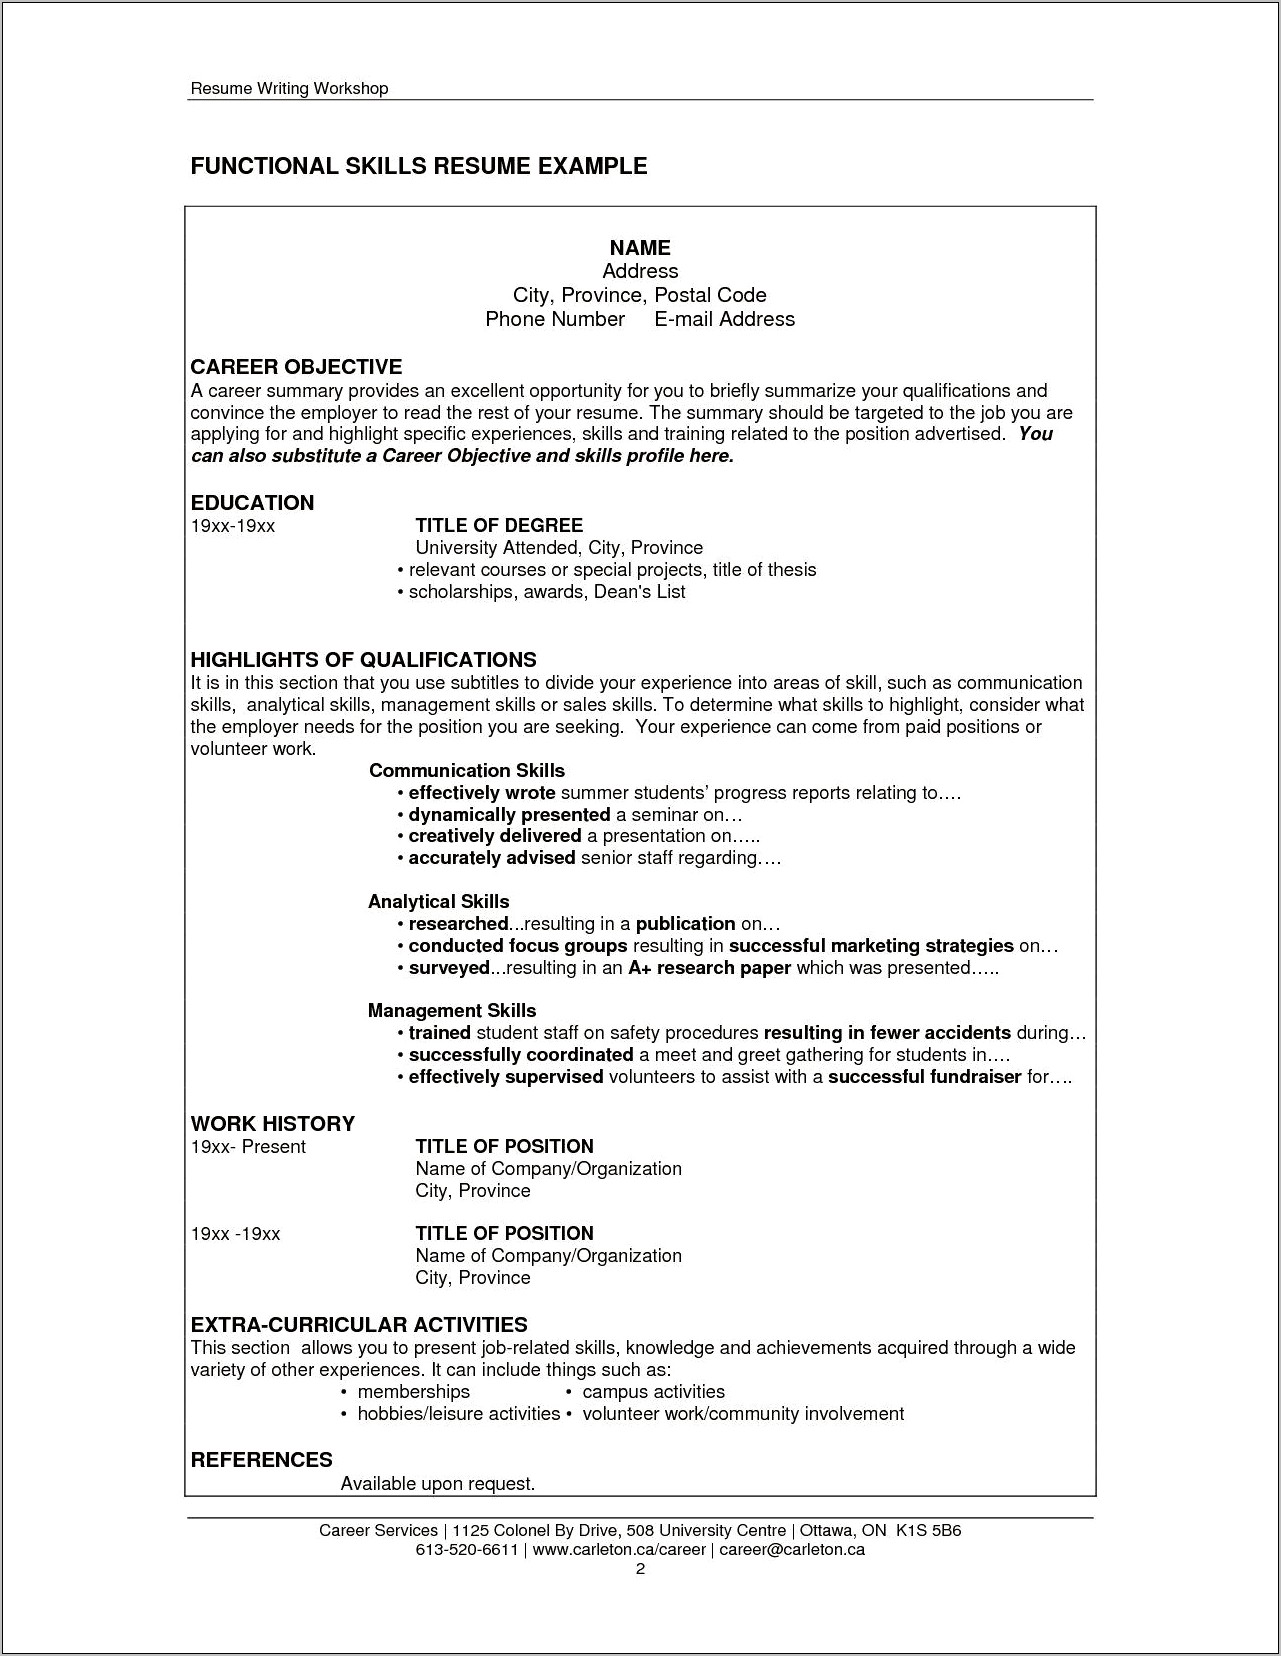 Examples Of Skills And Qualifications For Resume